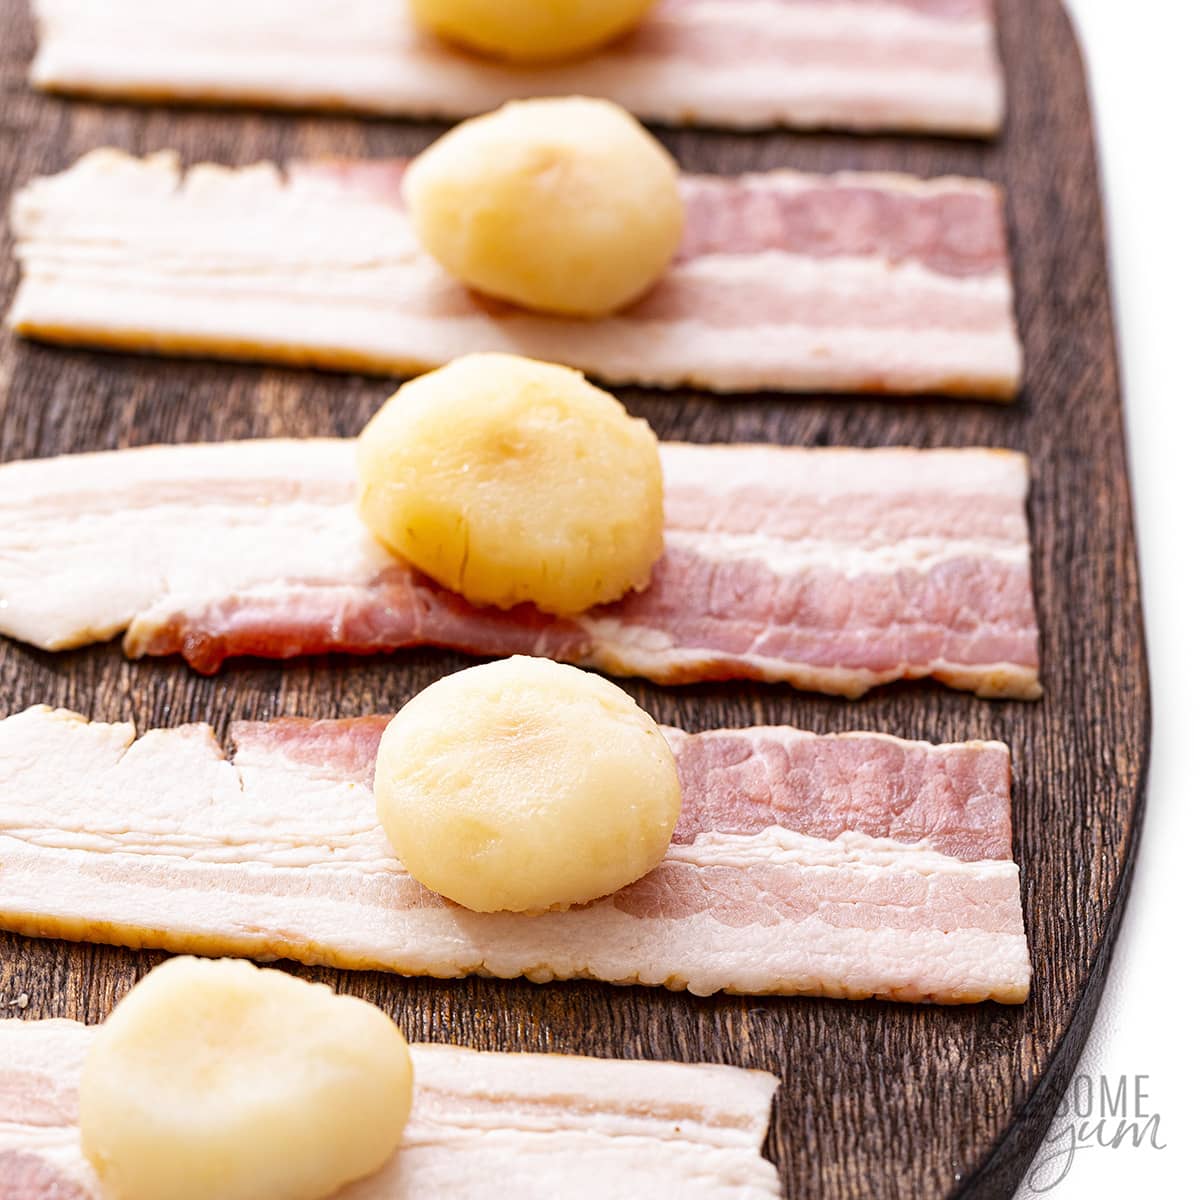 Water chestnuts in the center of raw bacon slices.